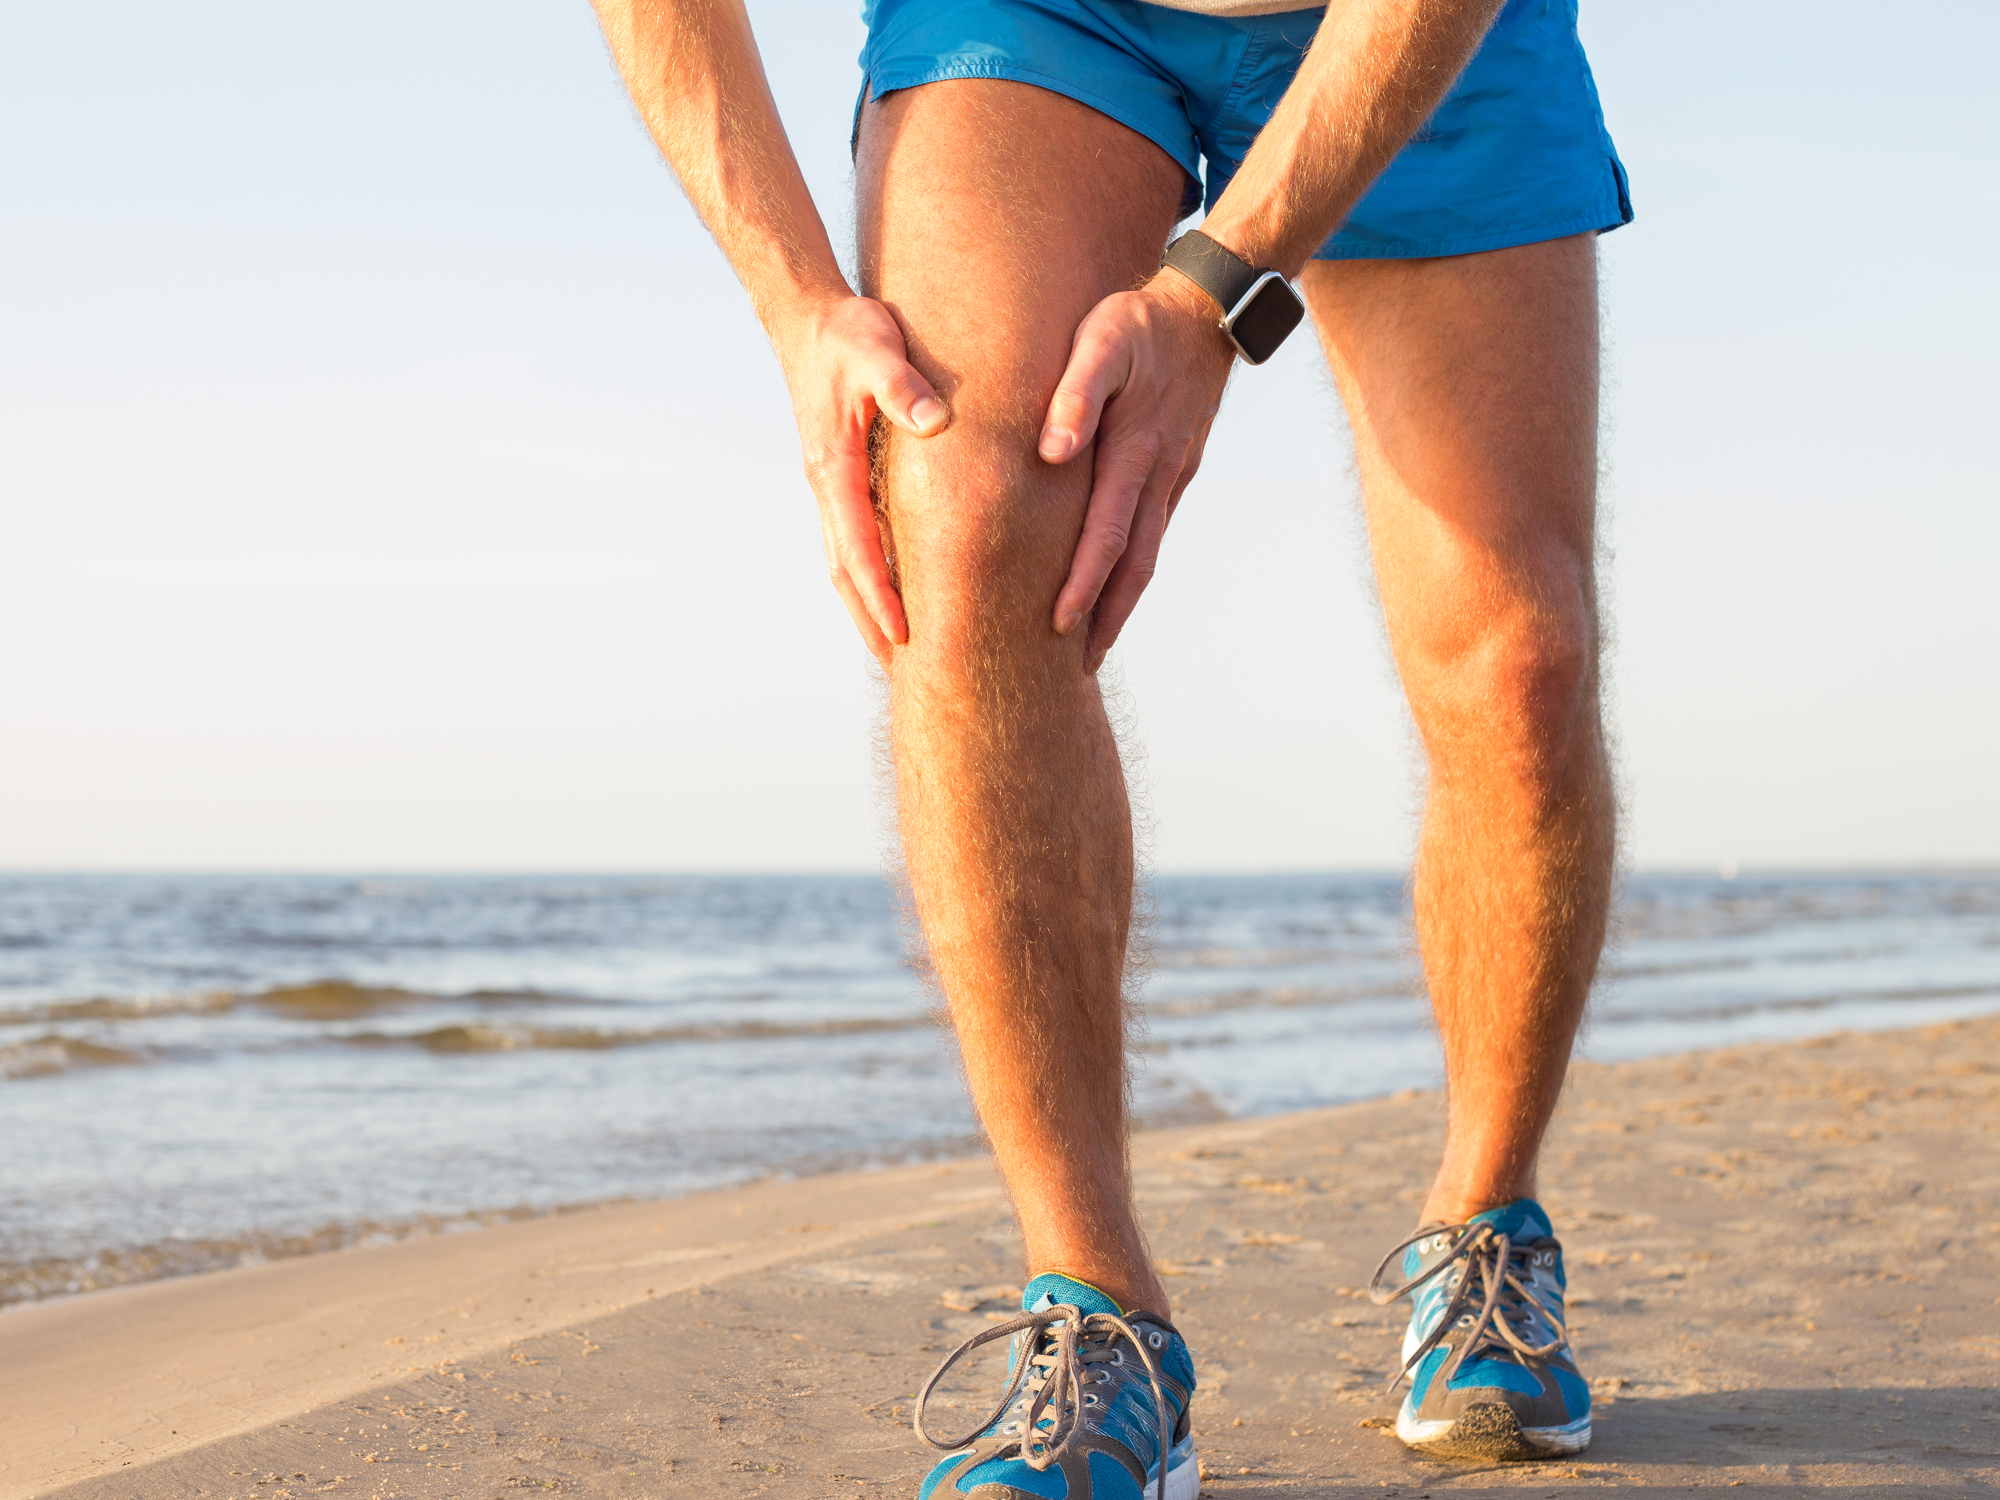 The 5 best exercises to get rid of chronic knee pain